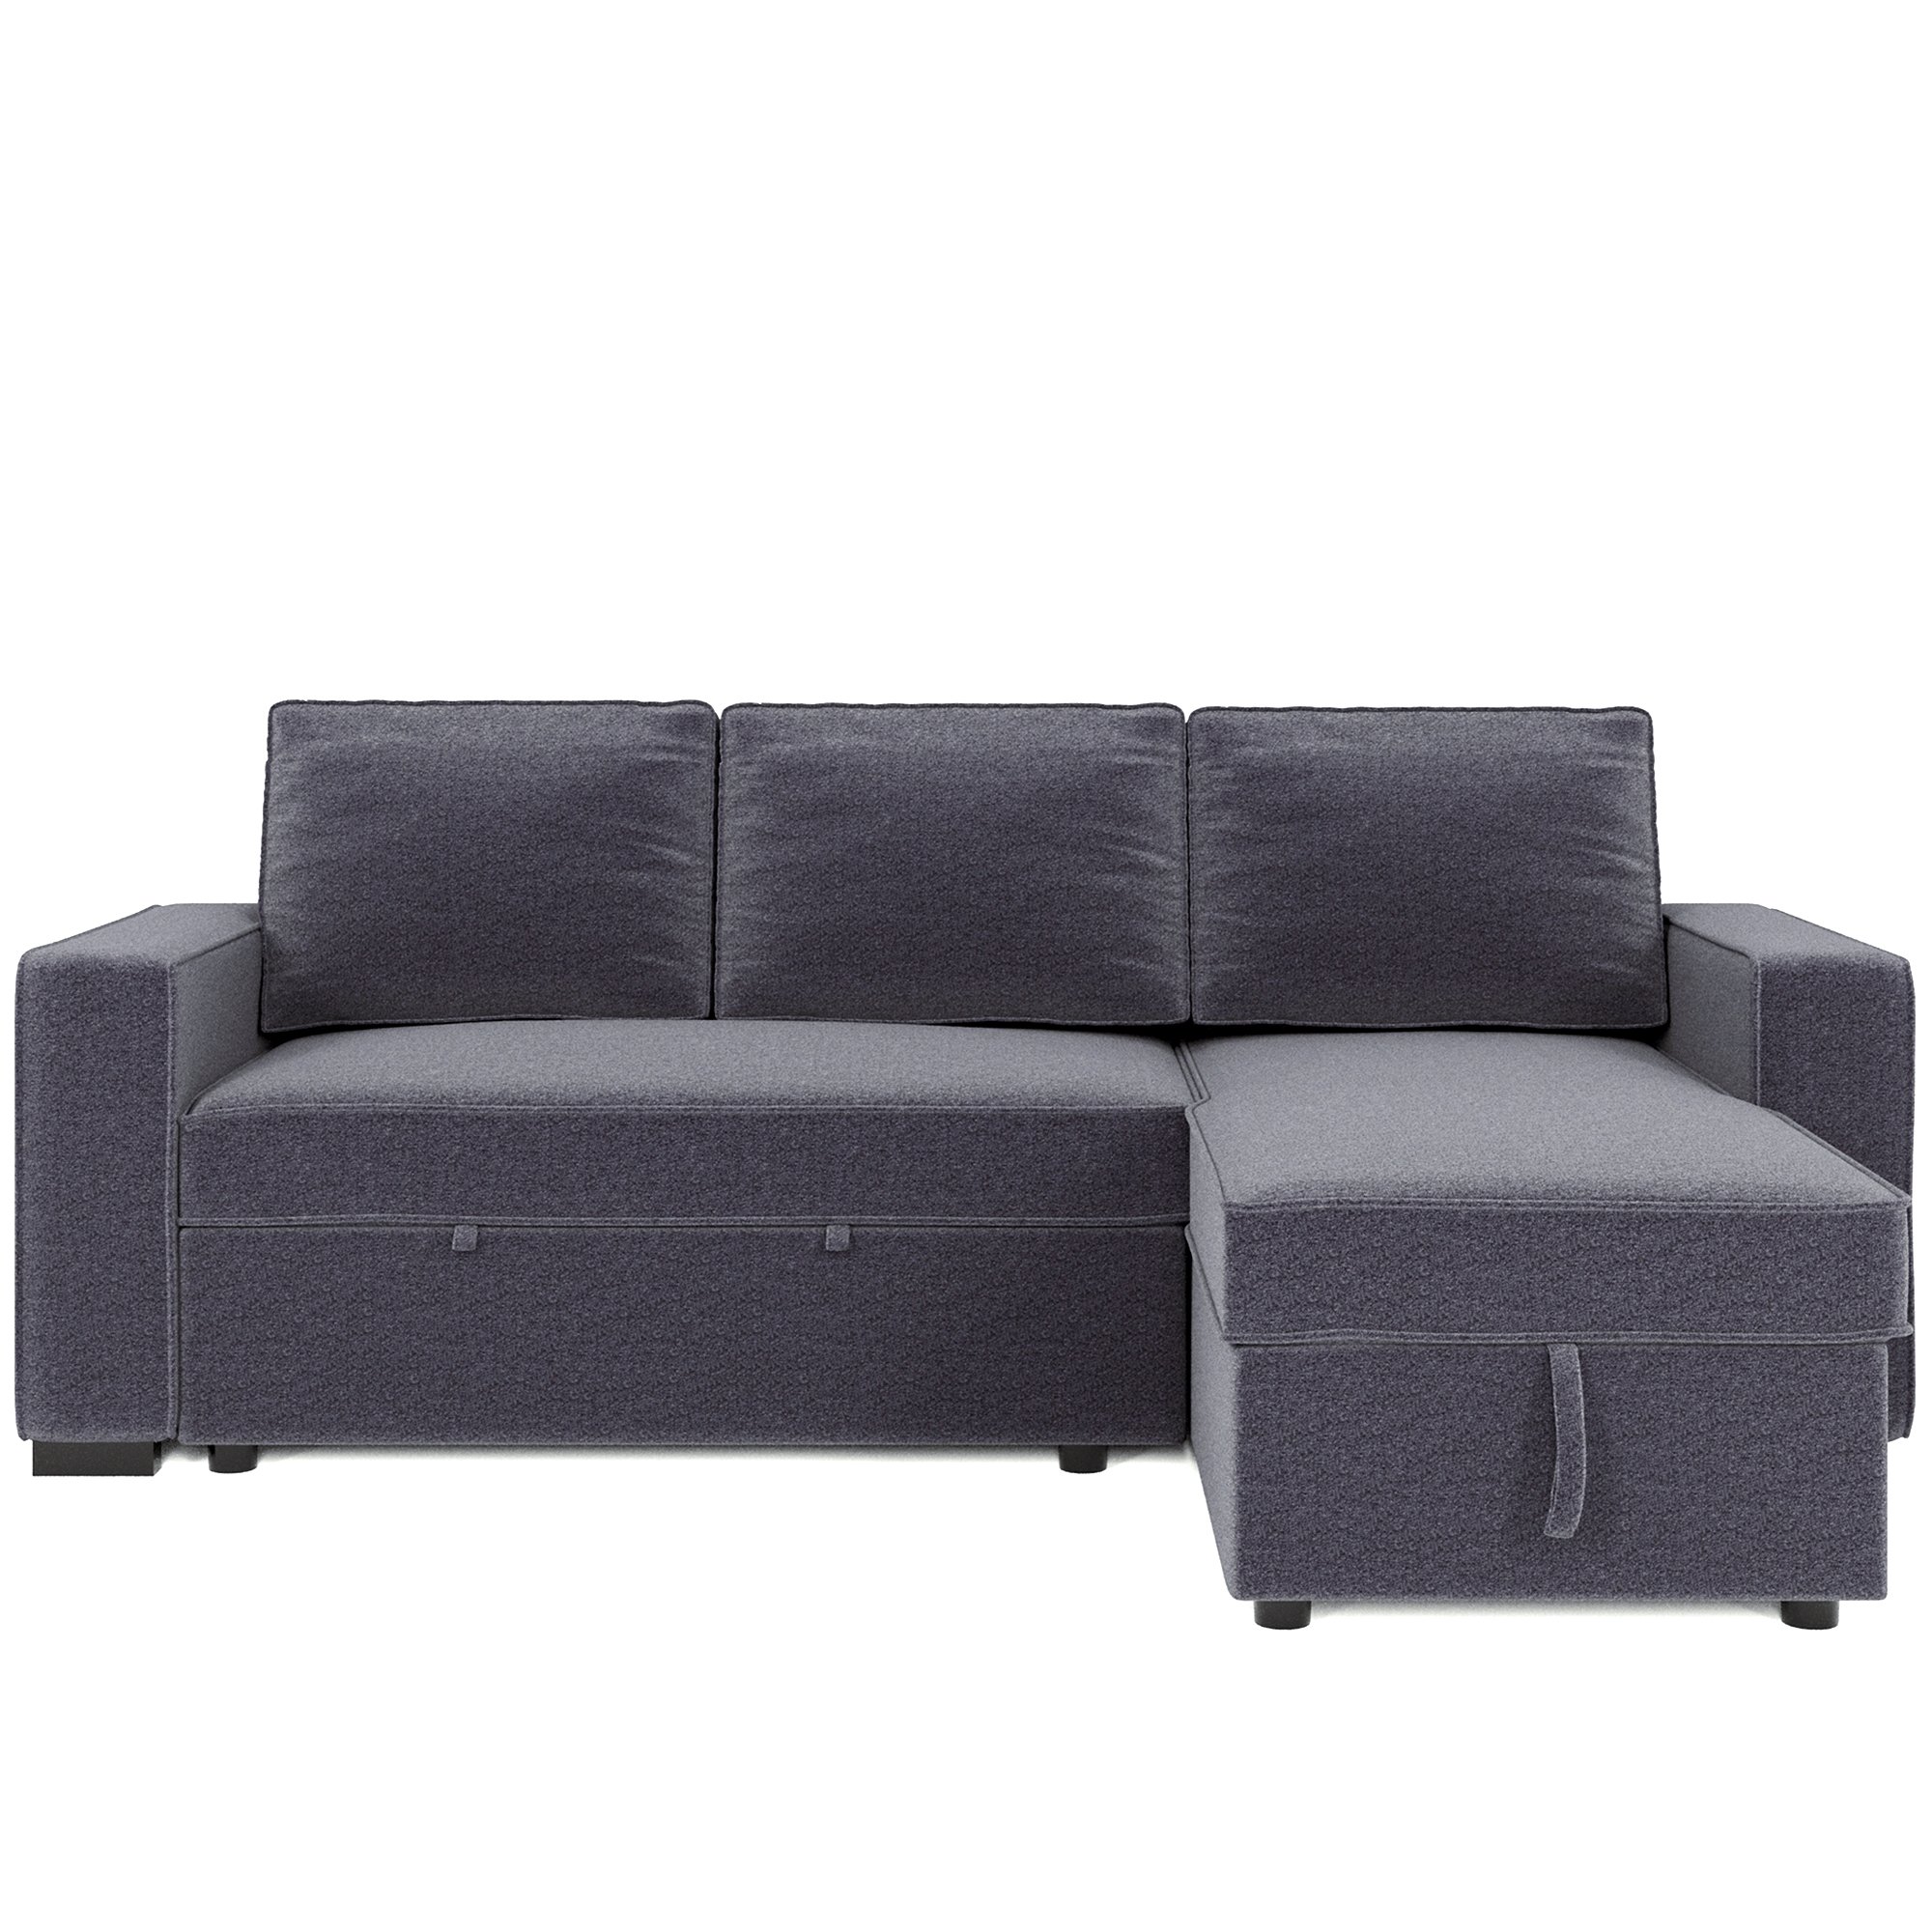 91.5" Reversible Pull out Sleeper Sectional Storage Sofa Bed,Corner sofa-bed with Storage Chaise Left/Right Handed Chaise-CASAINC